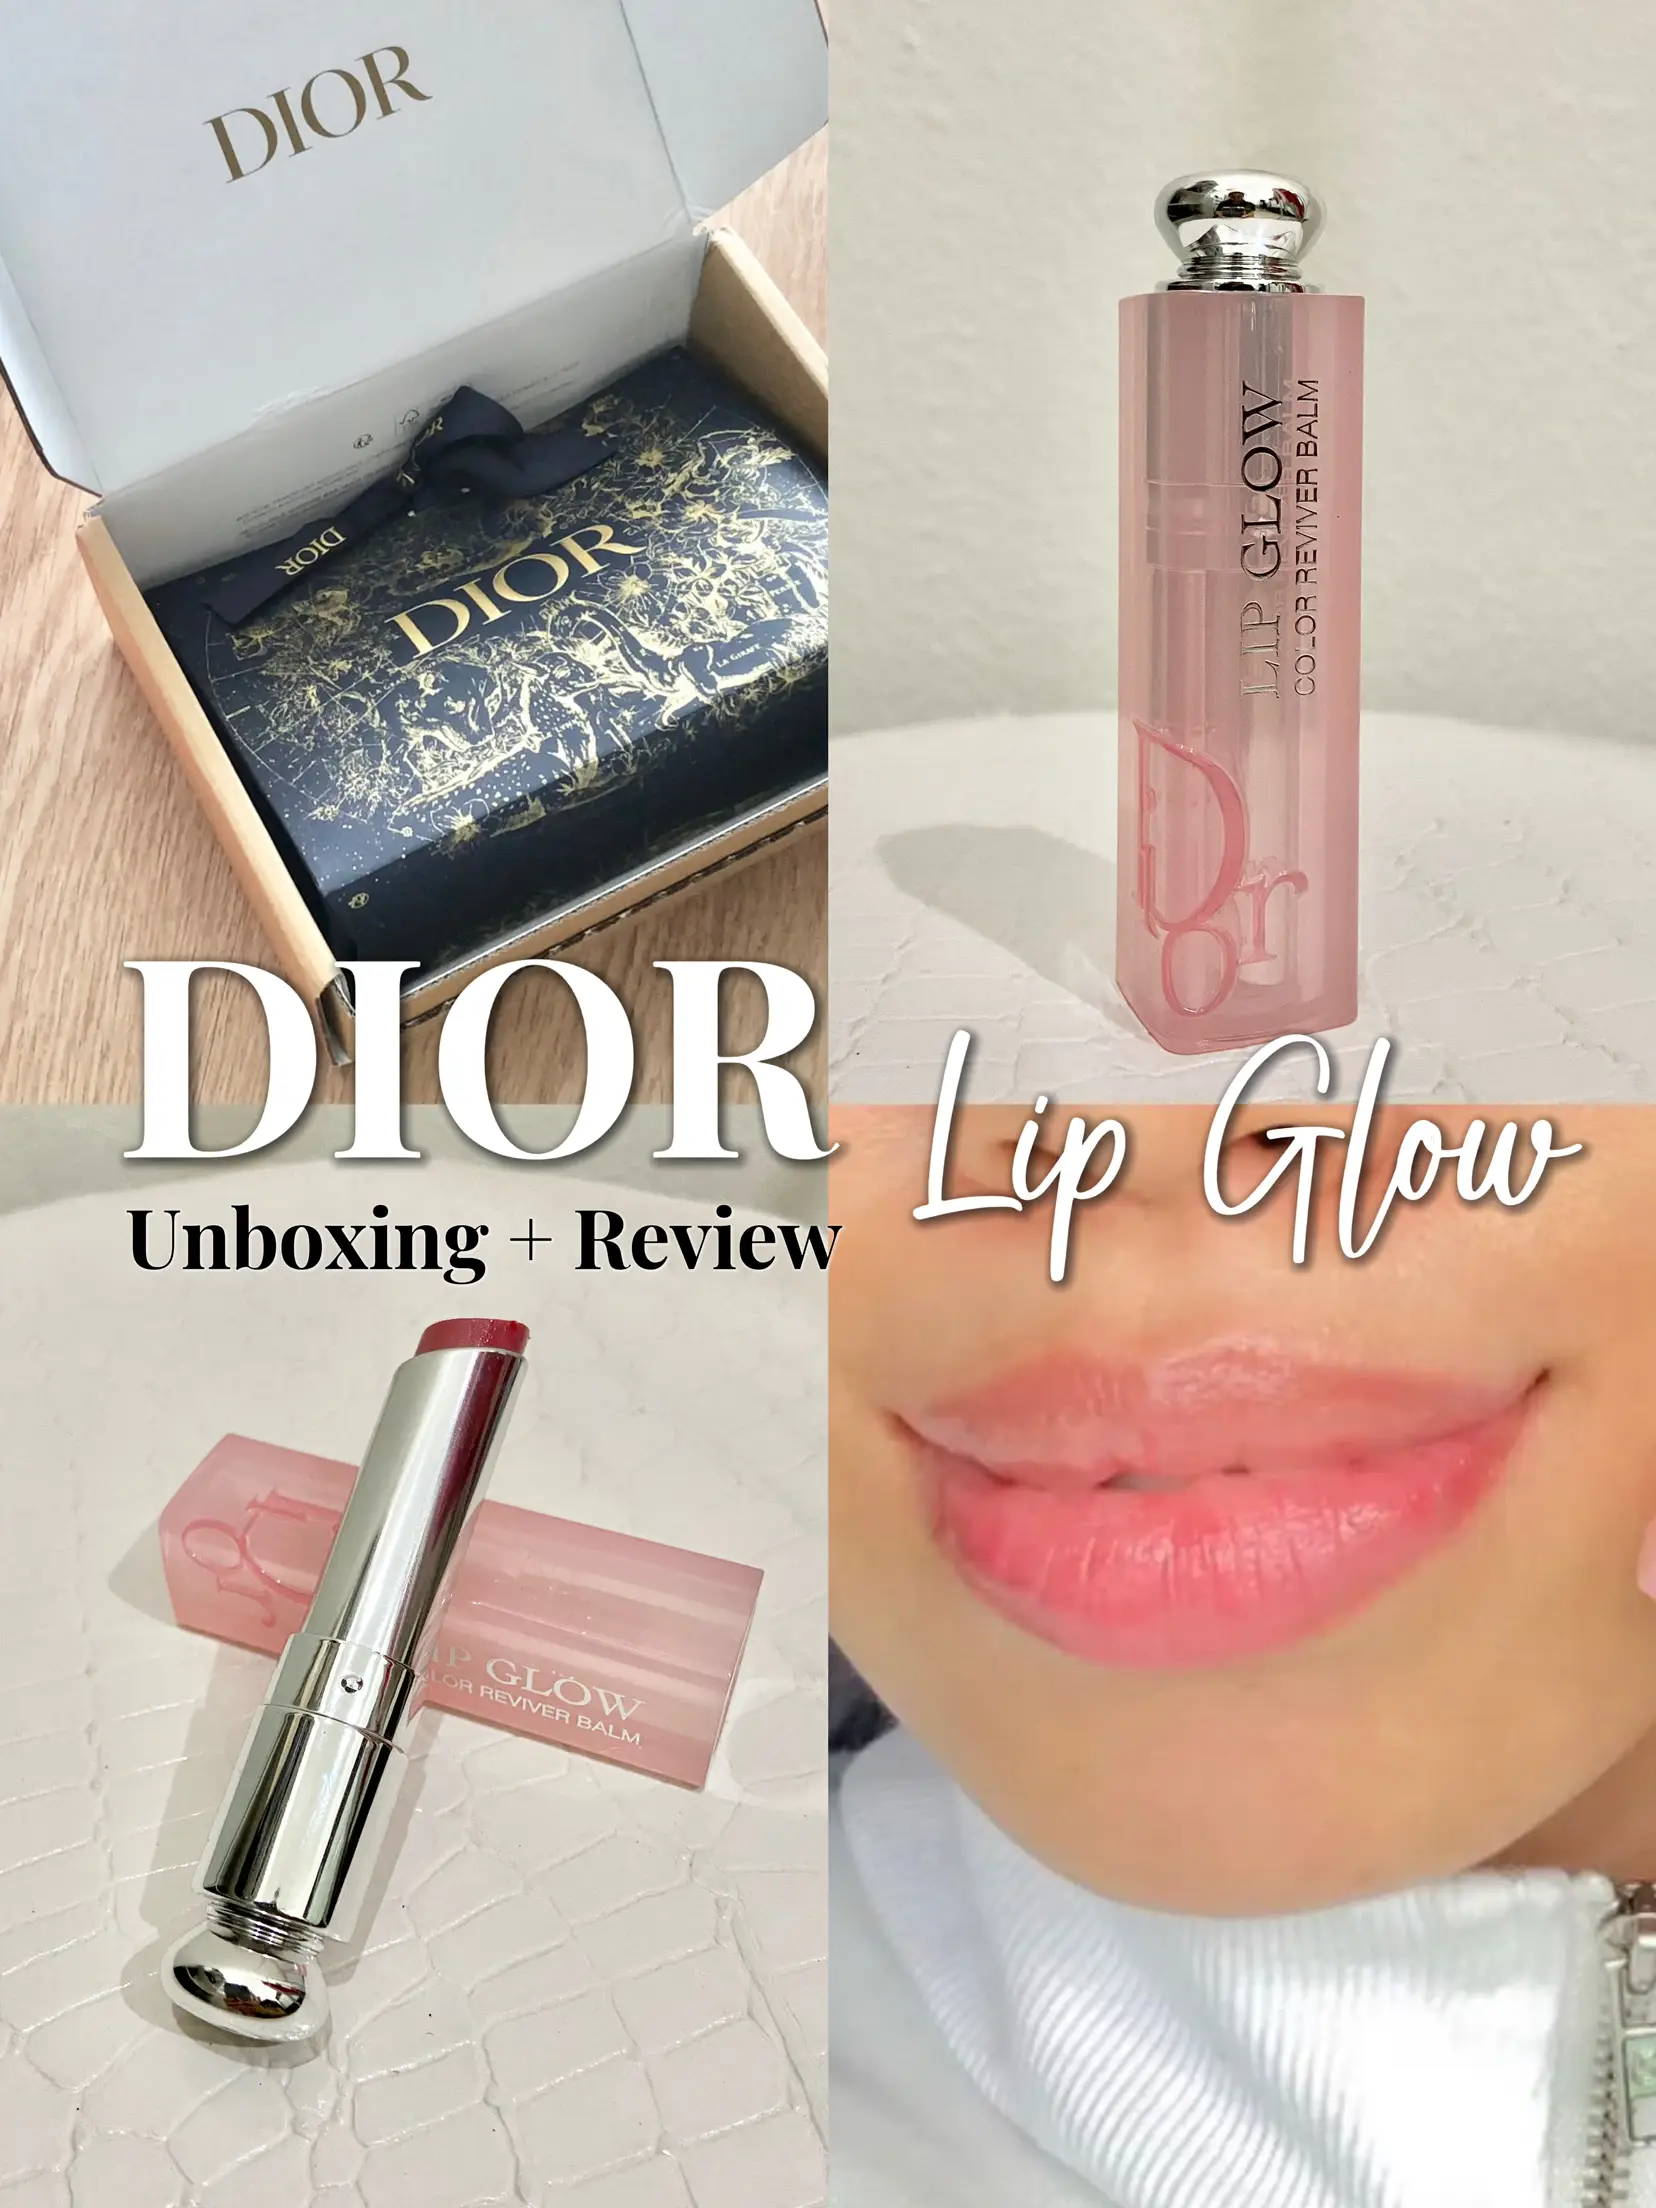 UNBOXING + REVIEW DIOR ADDICT LIP GLOW!